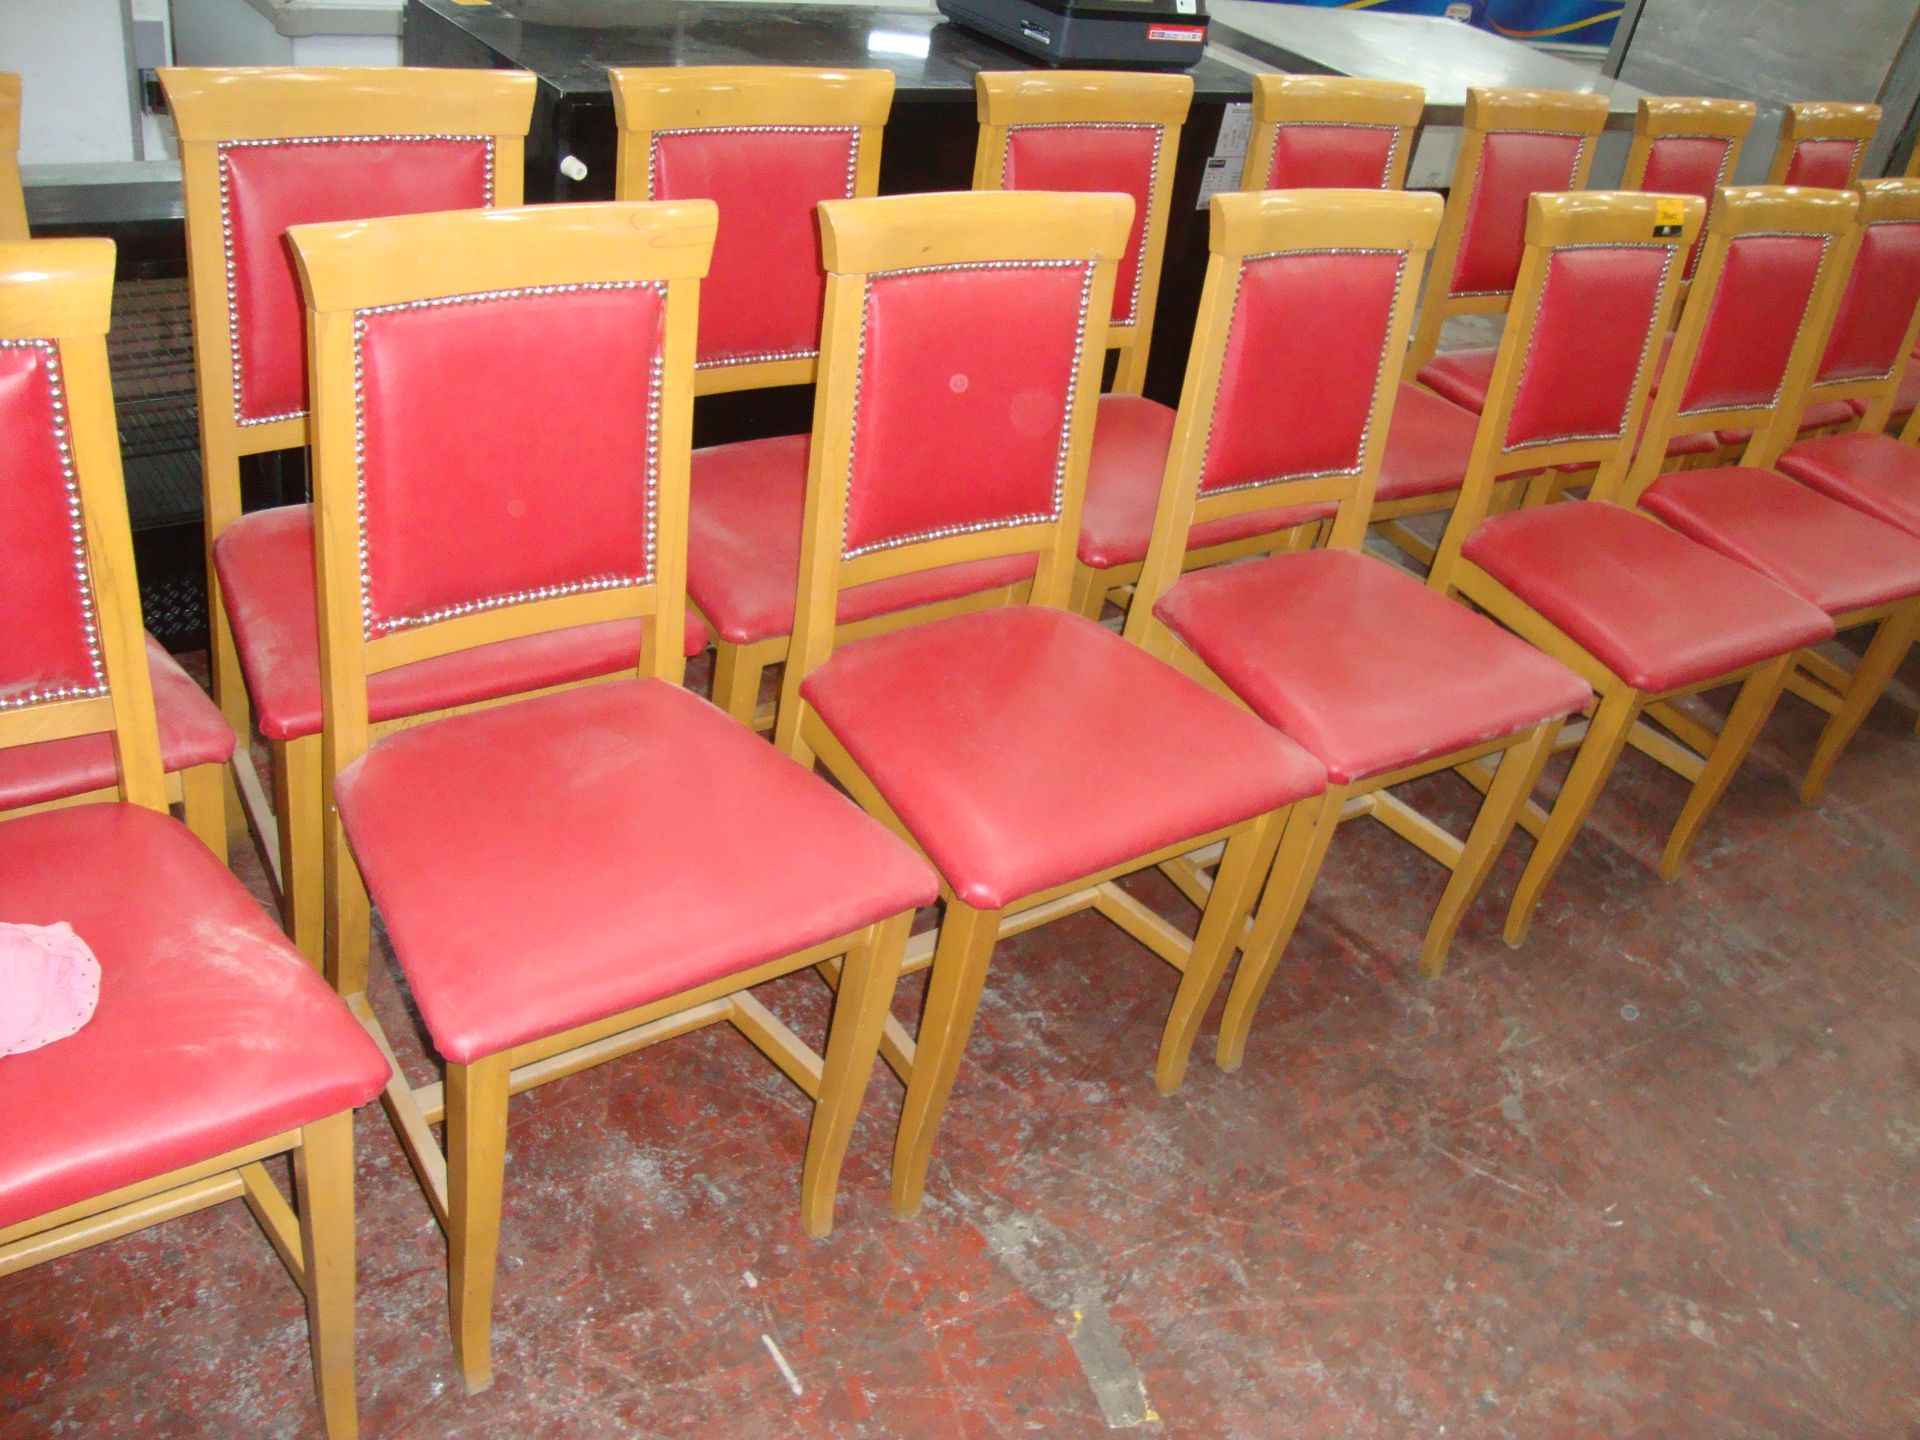 8 off wooden dining chairs with red upholstery NB. Lots 358 - 361 consist of different quantities of - Image 5 of 5